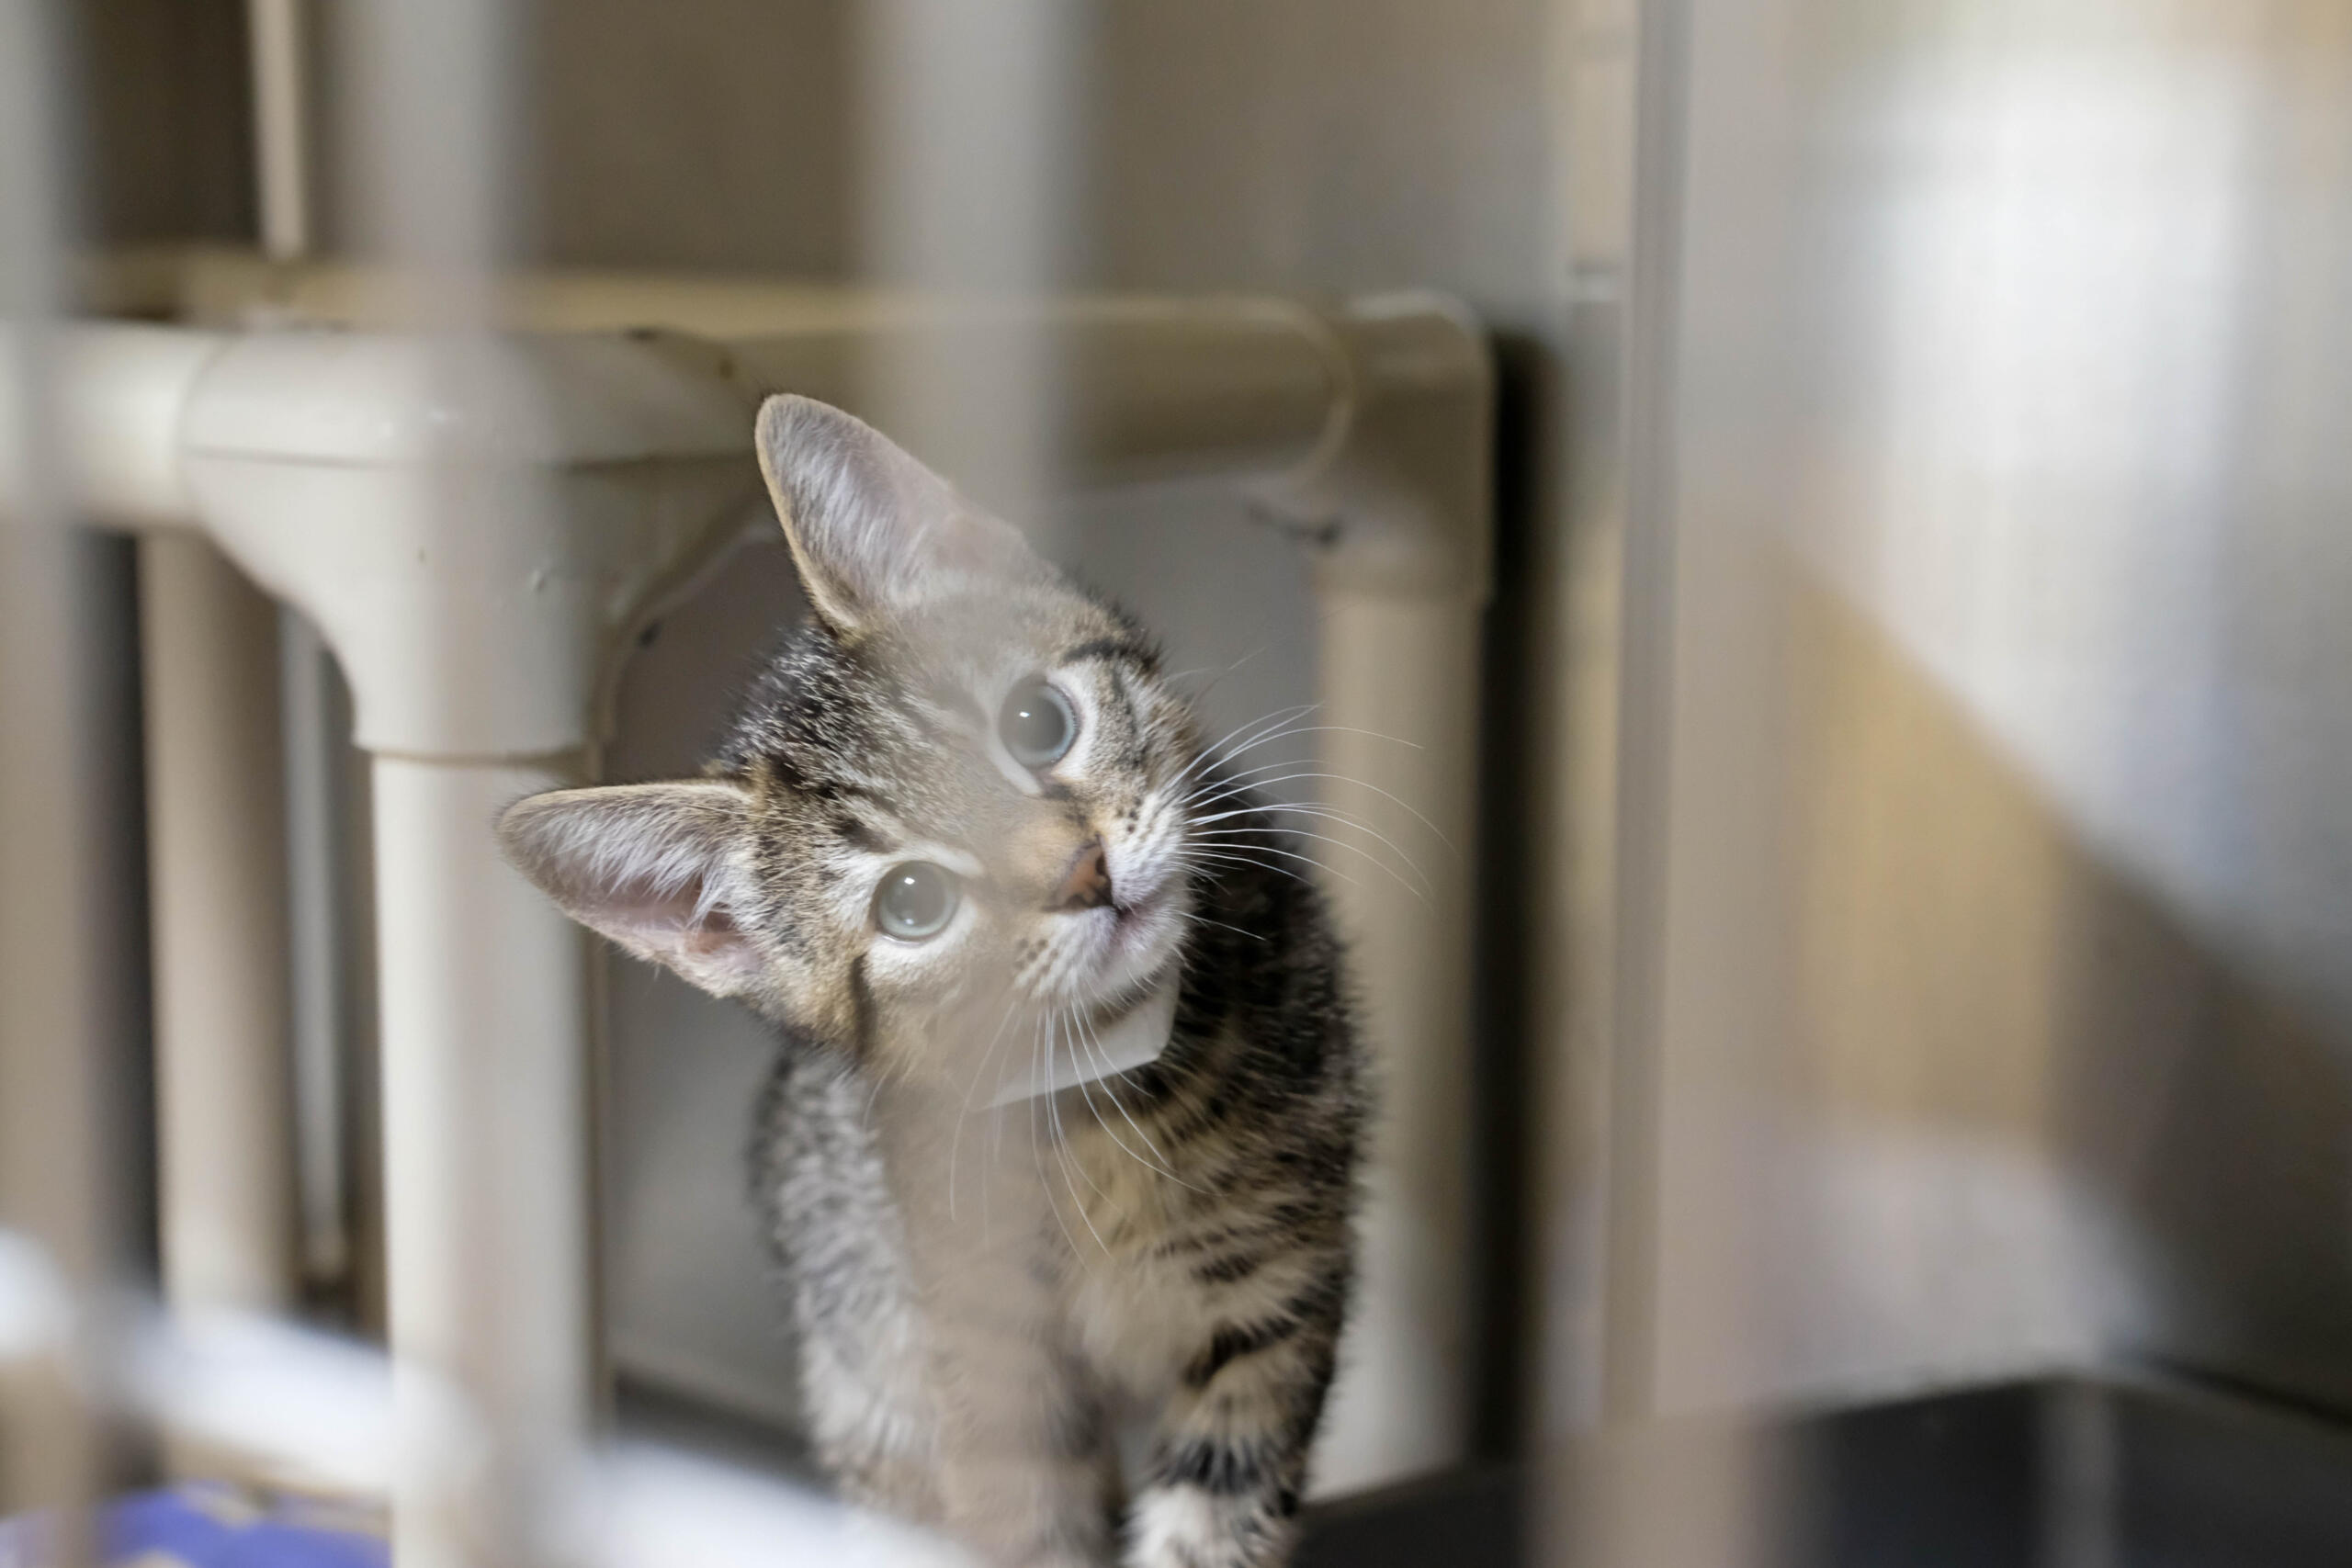 The Humane Society for Southwest Washington and other groups in Clark County help provide services for the pets of unhoused and low-income residents, including spay and neuter for cats.